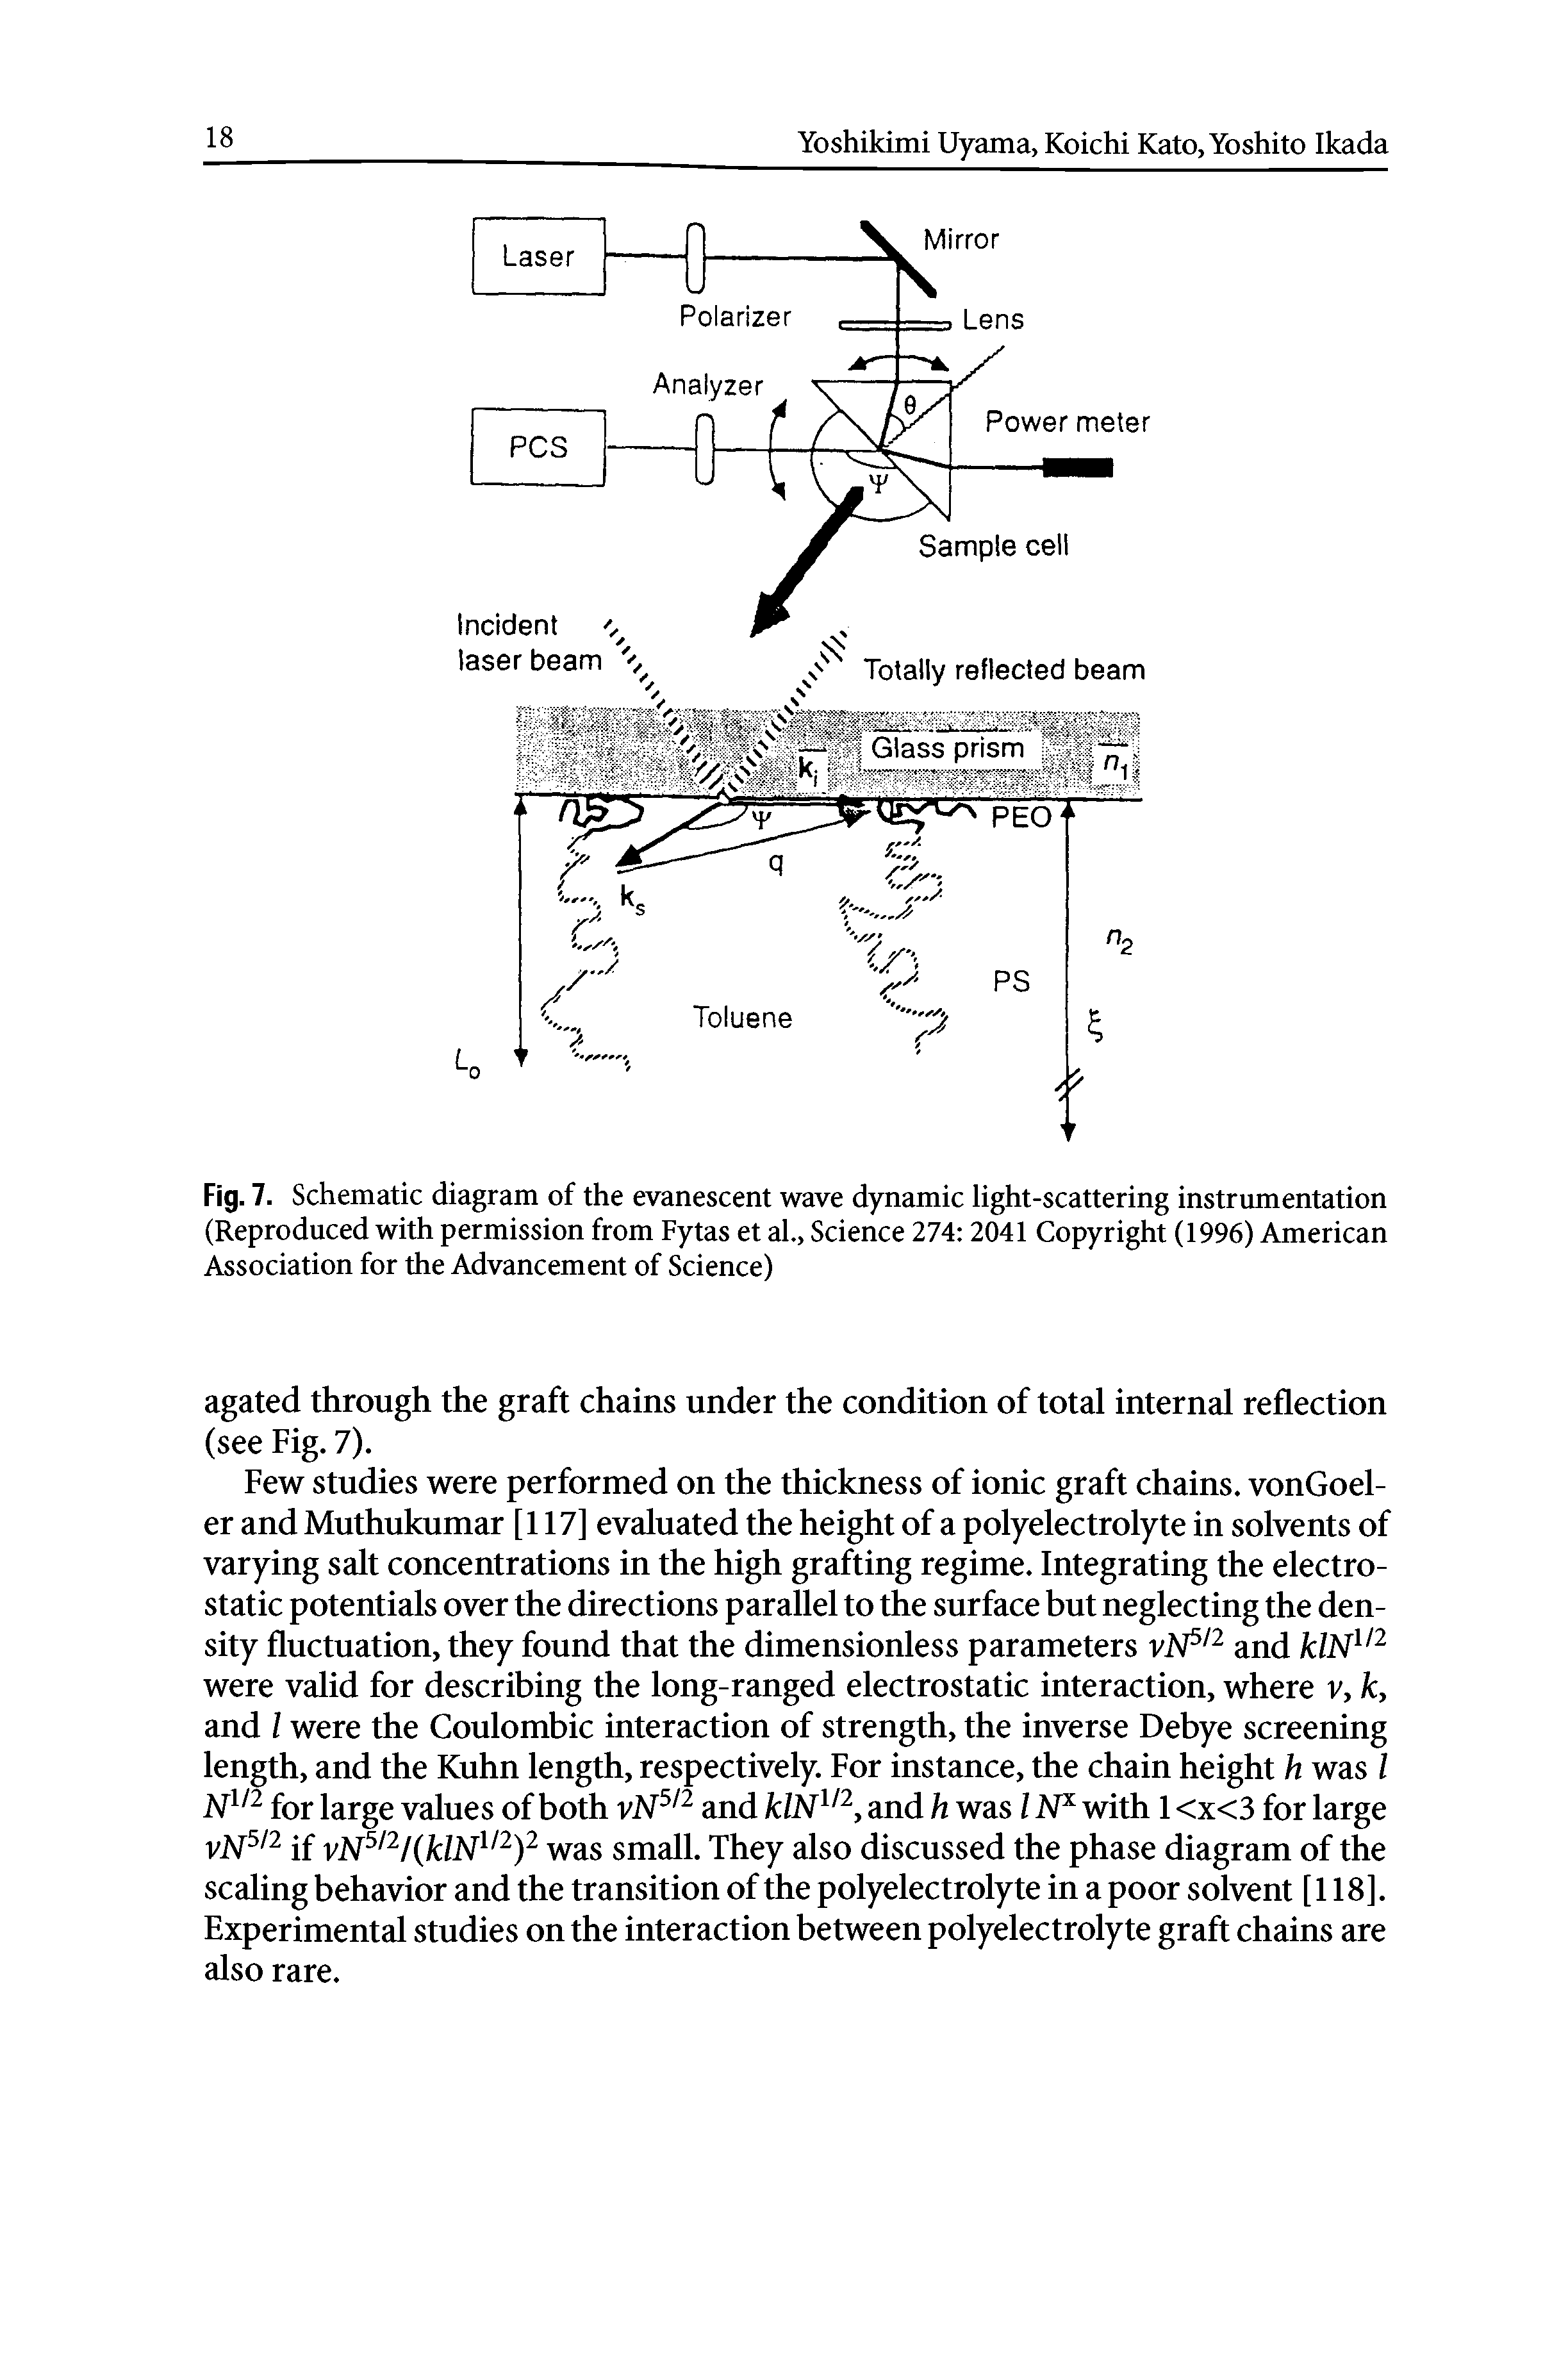 Fig. 7. Schematic diagram of the evanescent wave dynamic light-scattering instrumentation (Reproduced with permission from Fytas et al., Science 274 2041 Copyright (1996) American Association for the Advancement of Science)...